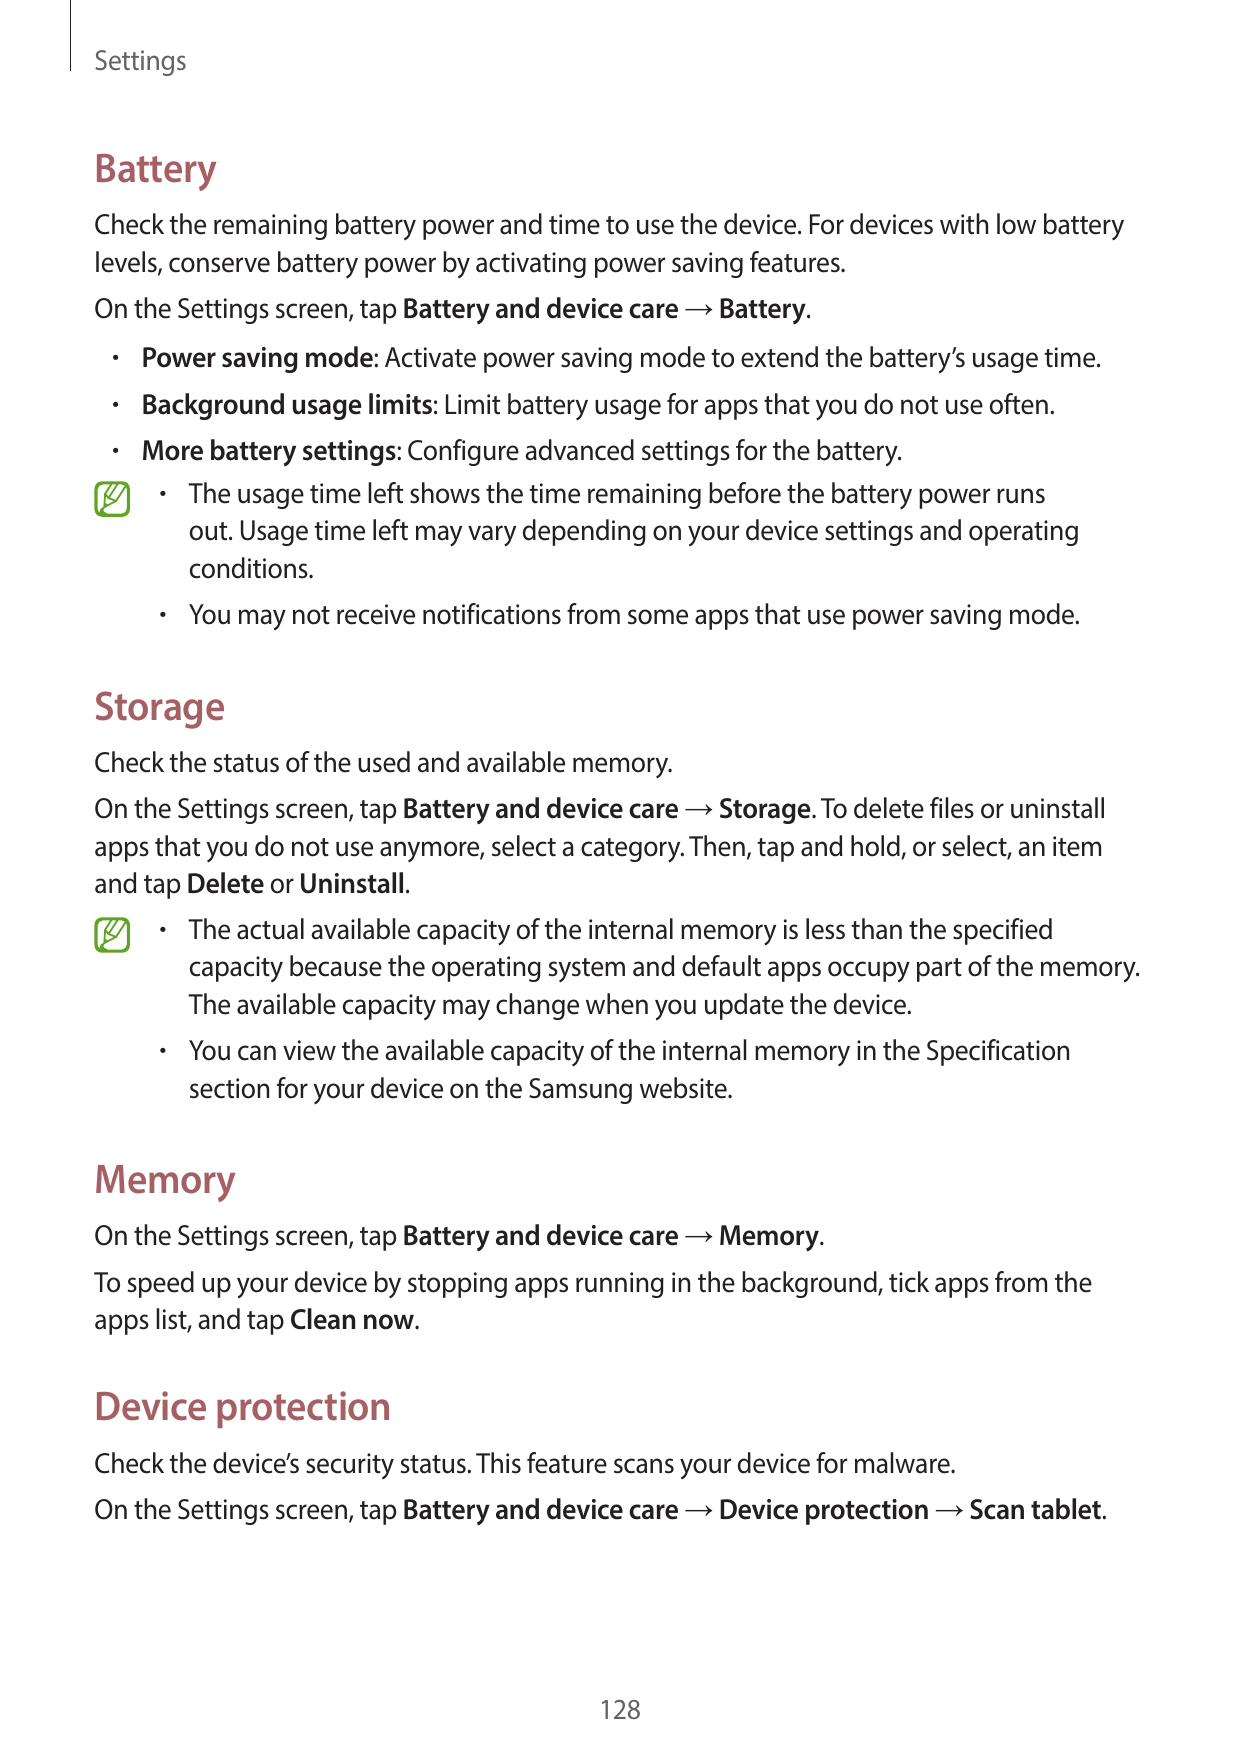 SettingsBatteryCheck the remaining battery power and time to use the device. For devices with low batterylevels, conserve batter